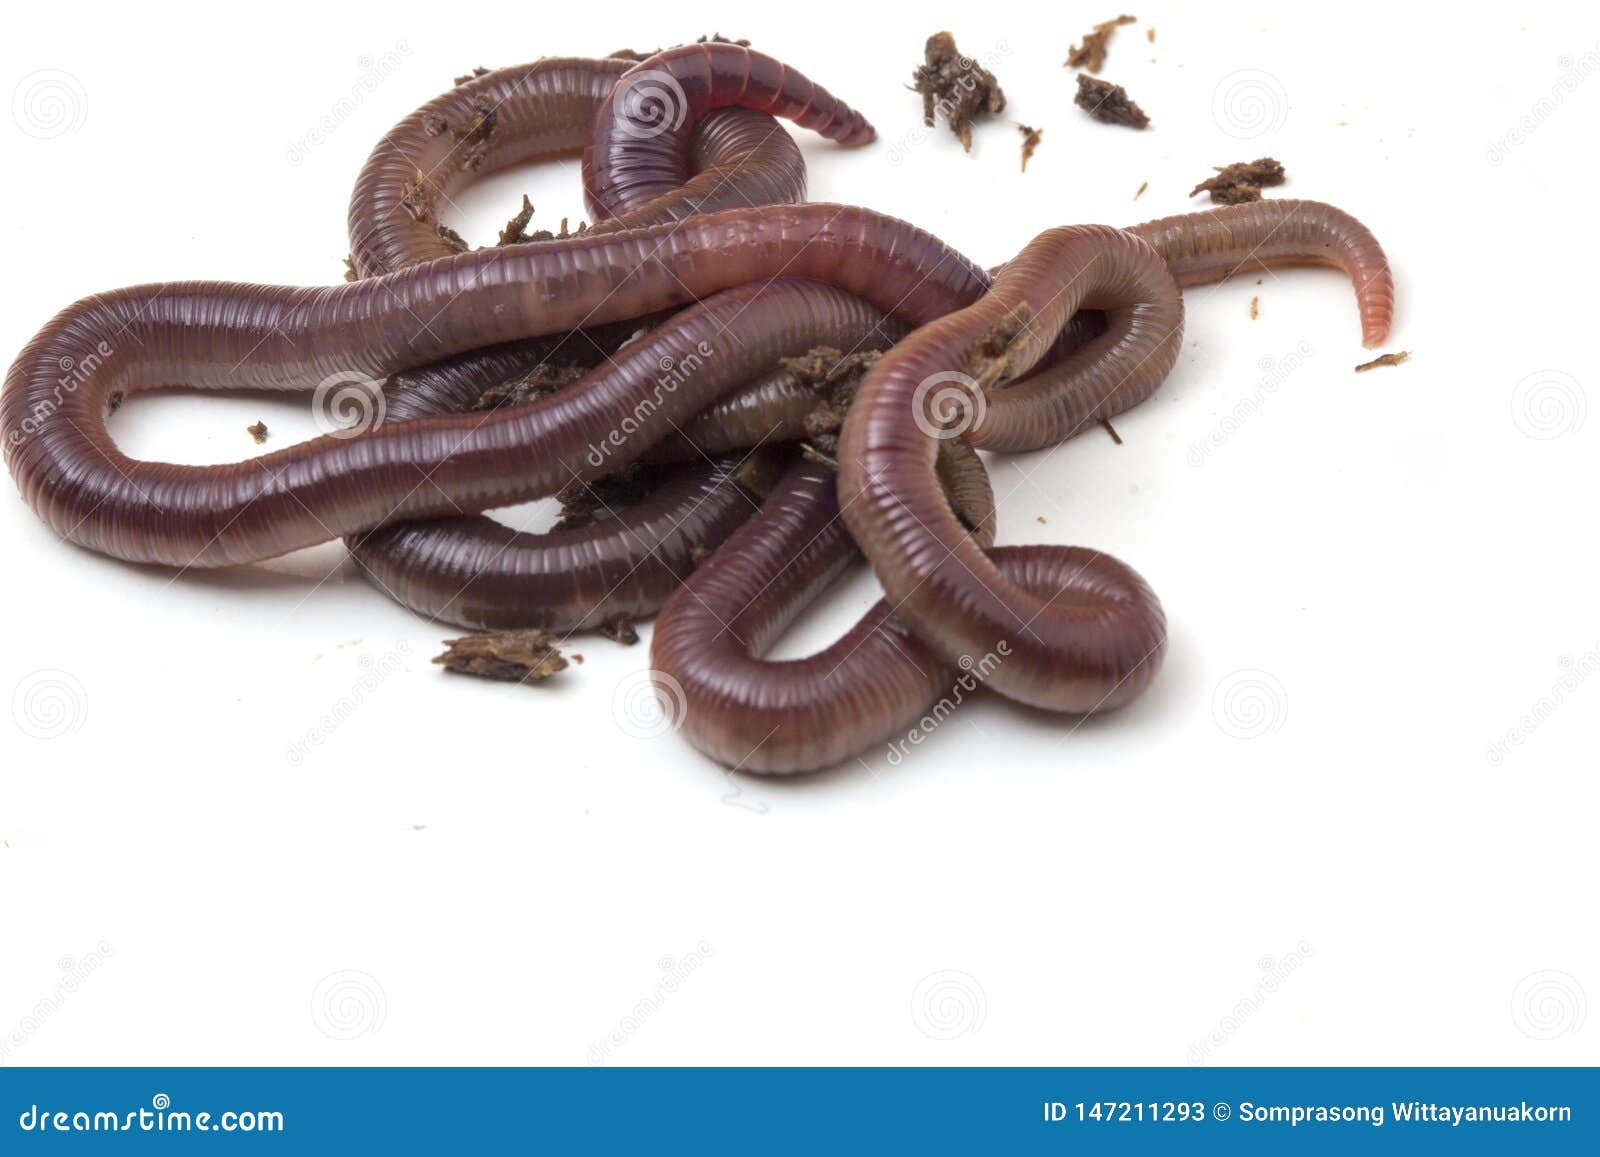 African Night Crawler, Earthworms Isolated on White Background Stock Image  - Image of background, earthworms: 147211293